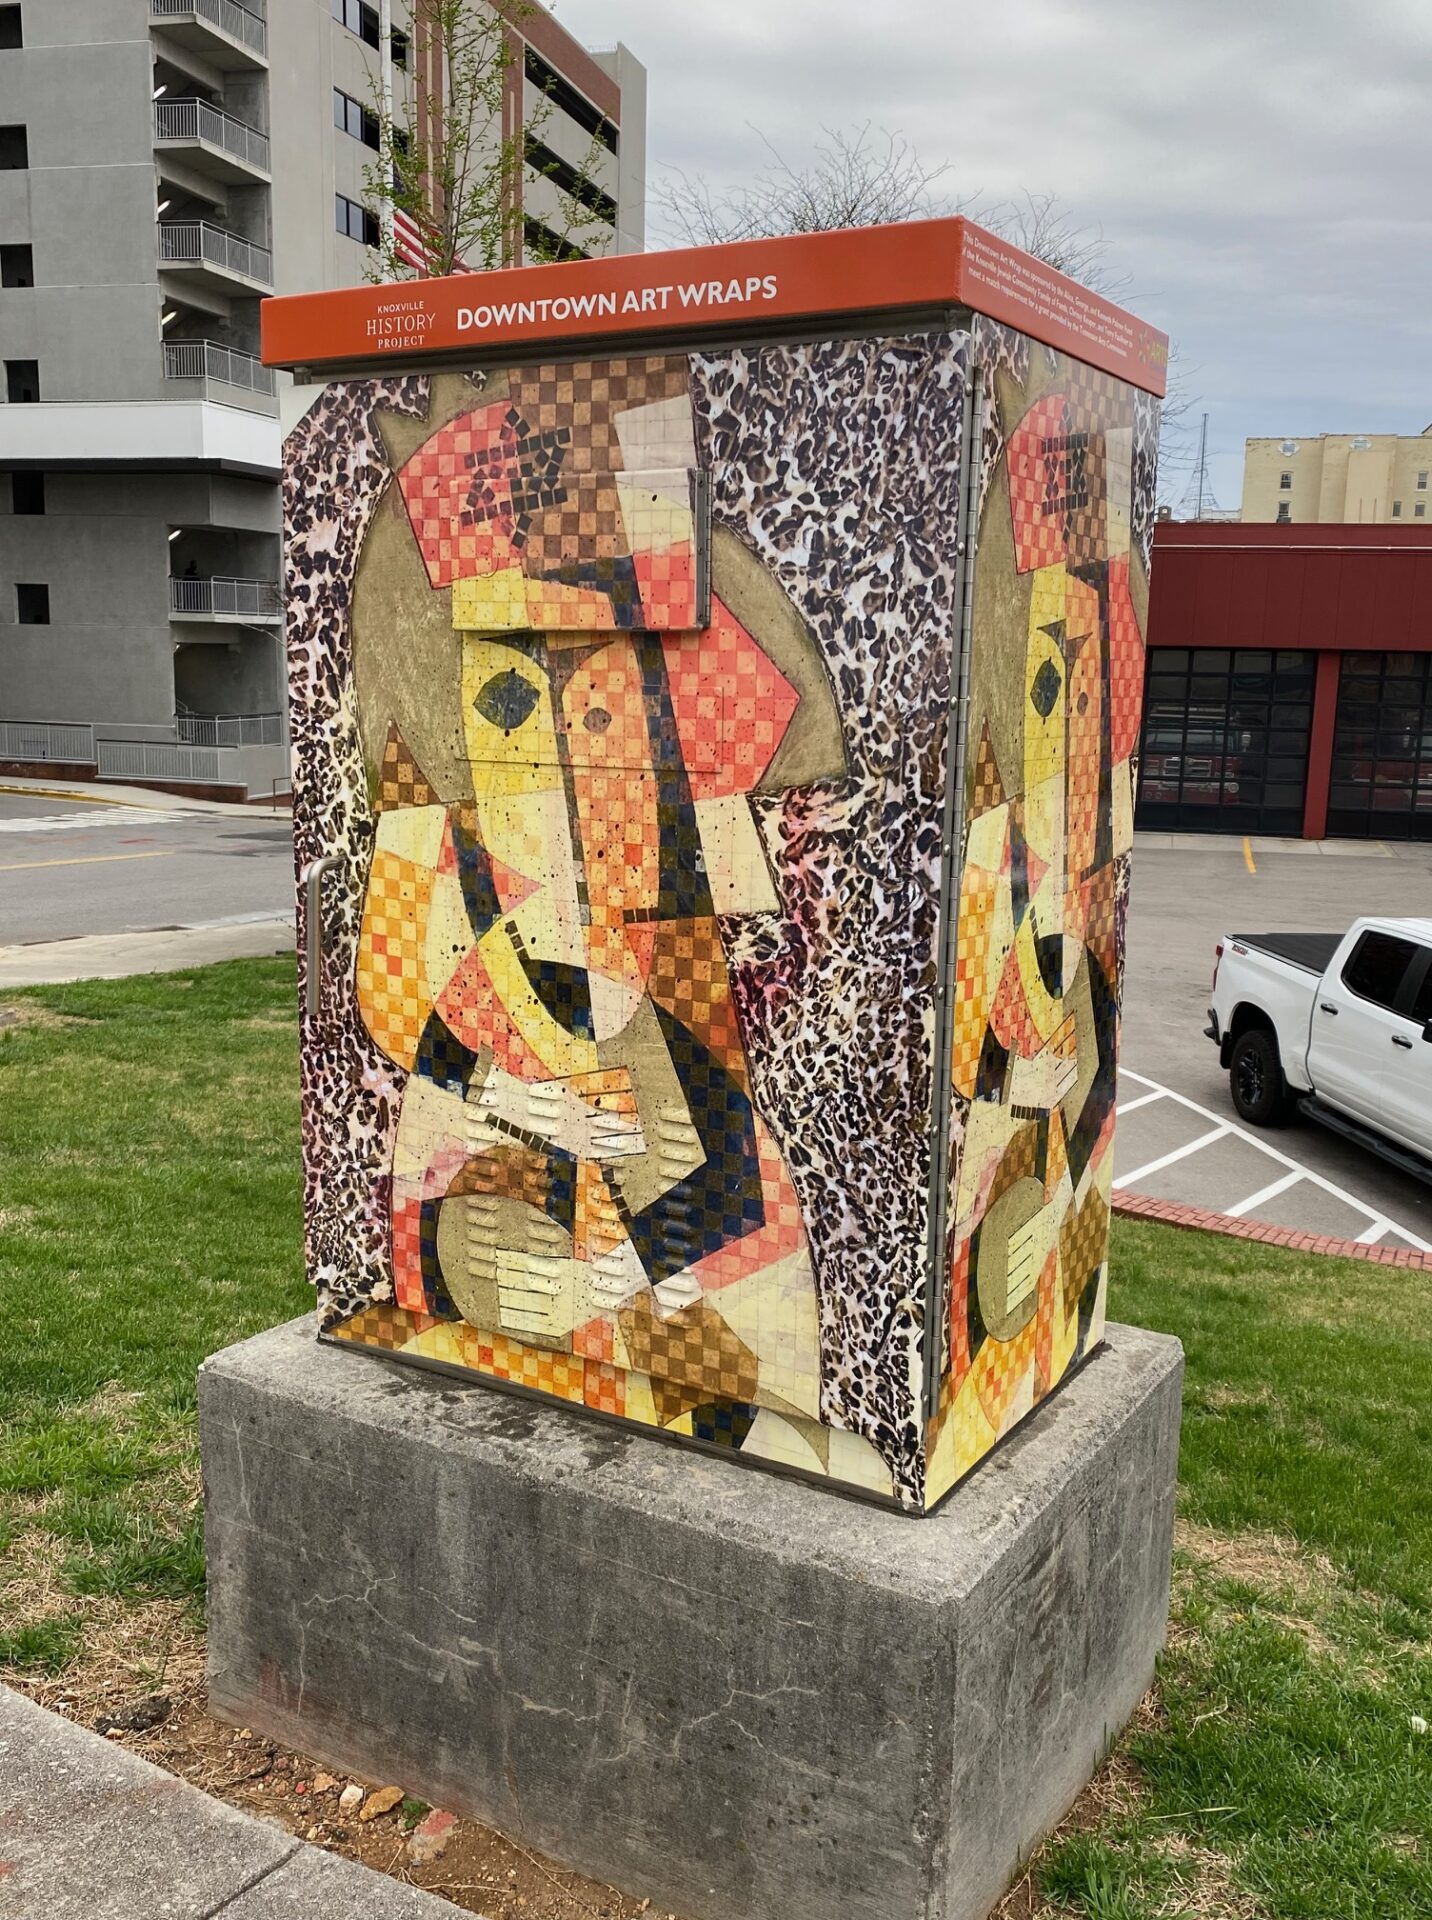 King David by Ted Burnett at W. Summit Hill Drive and Locust Street. Funded by This Downtown Art Wrap was sponsored by the Alice, George and Kenneth Palmer Fund for Arts & Sciences of the Knoxville Jewish Community Family of Funds, Chrissy Keuper, and Terry Faulkner to meet a match requirement for a grant provided by the Tennessee Arts Commission.